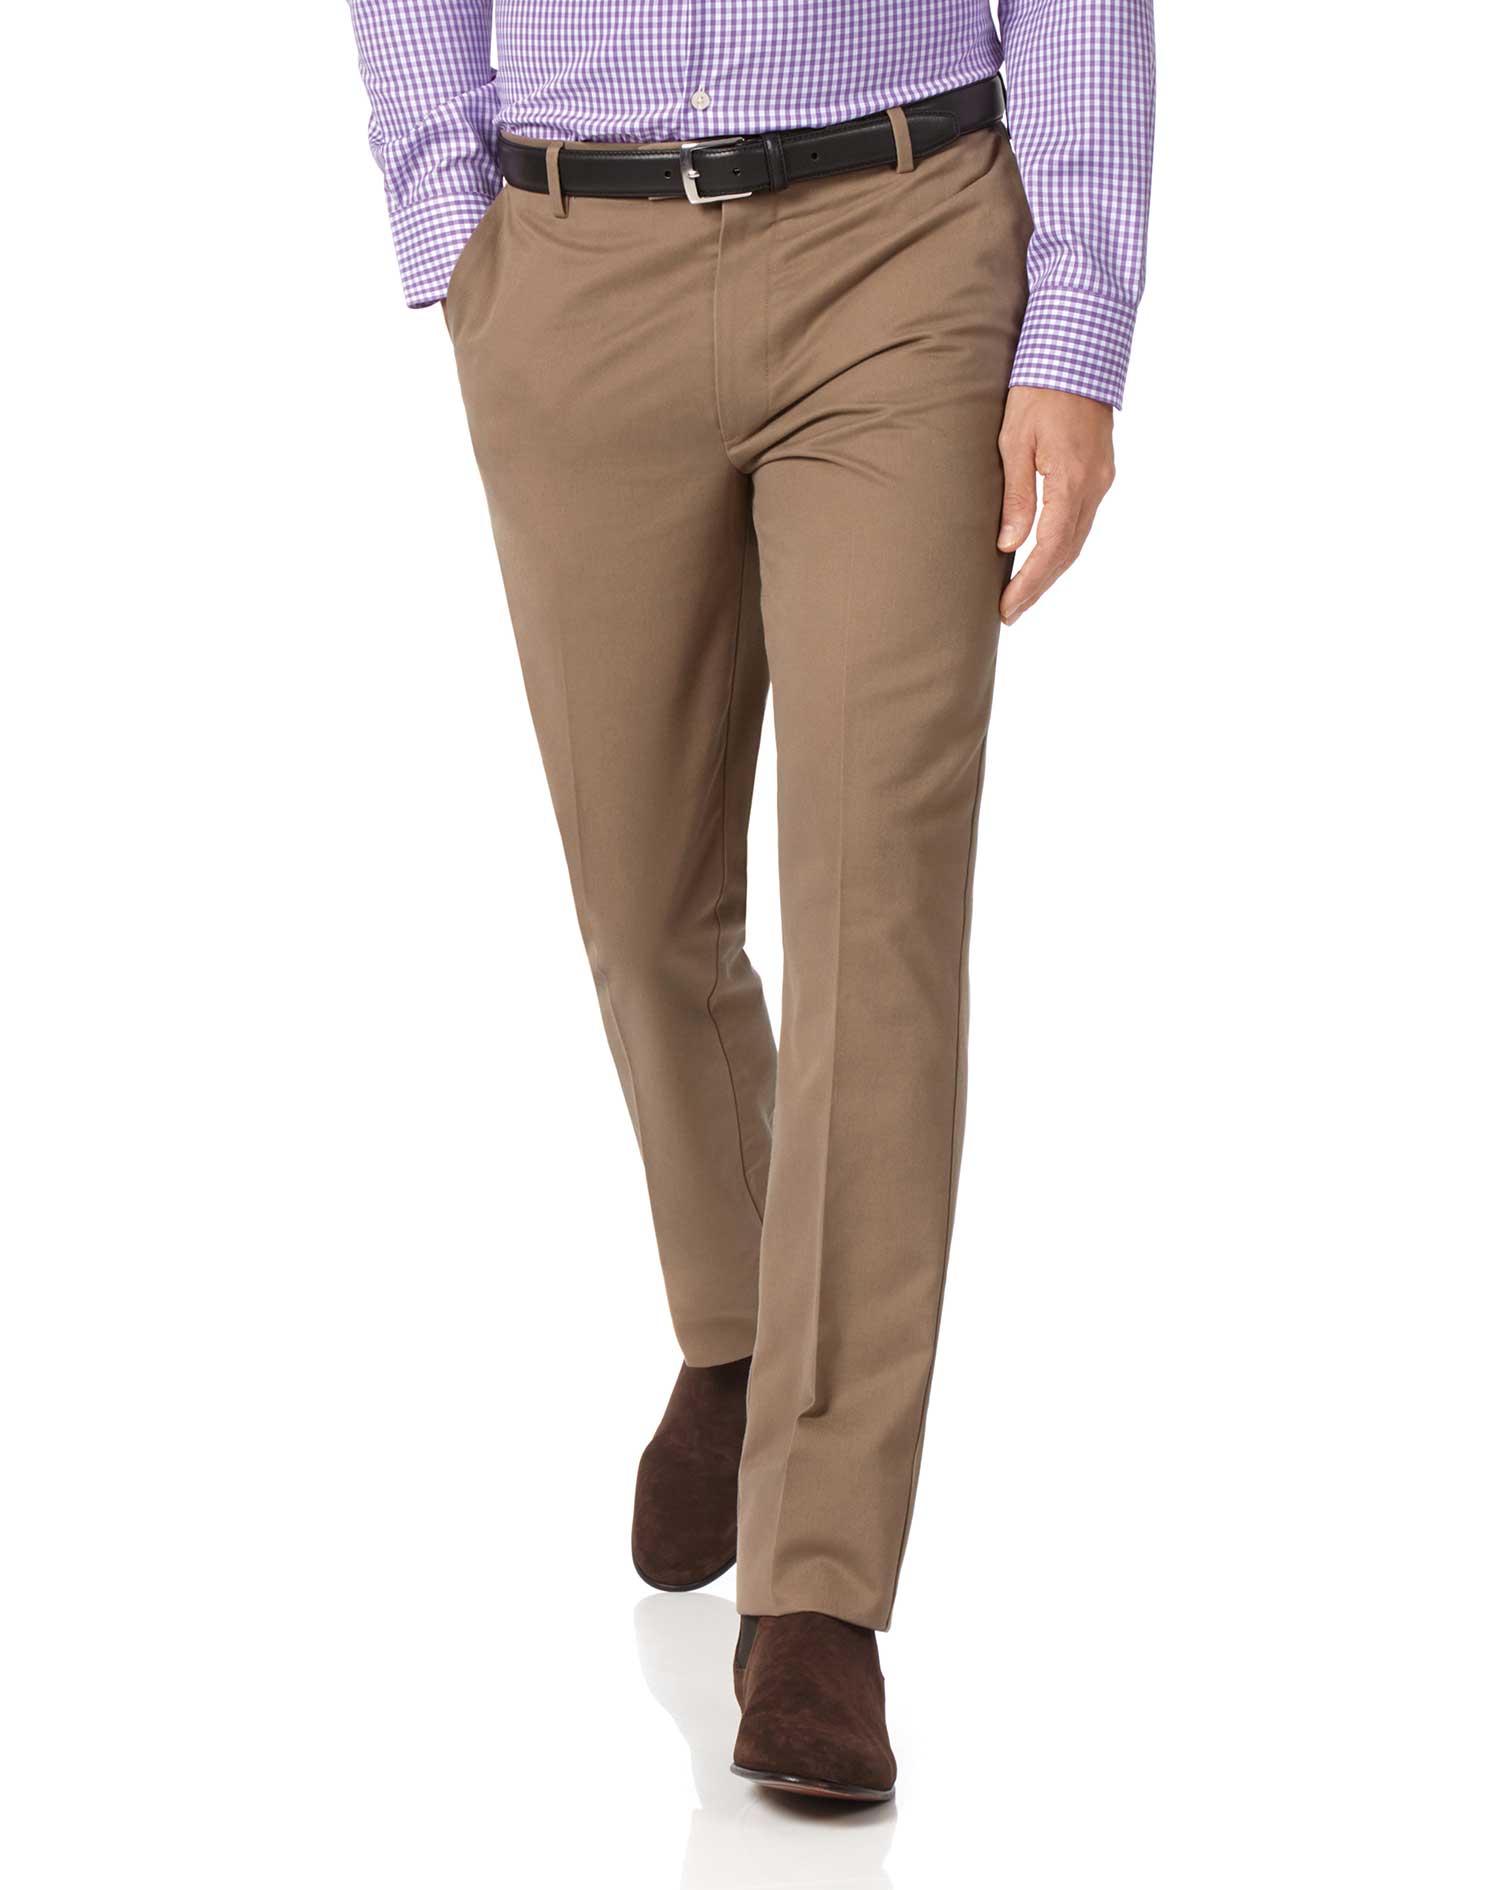 Stone slim fit flat front chinos - CT Shirts UK | Charles Tyrwhitt | Mens  chino trousers, Mens street style, Stylish mens outfits